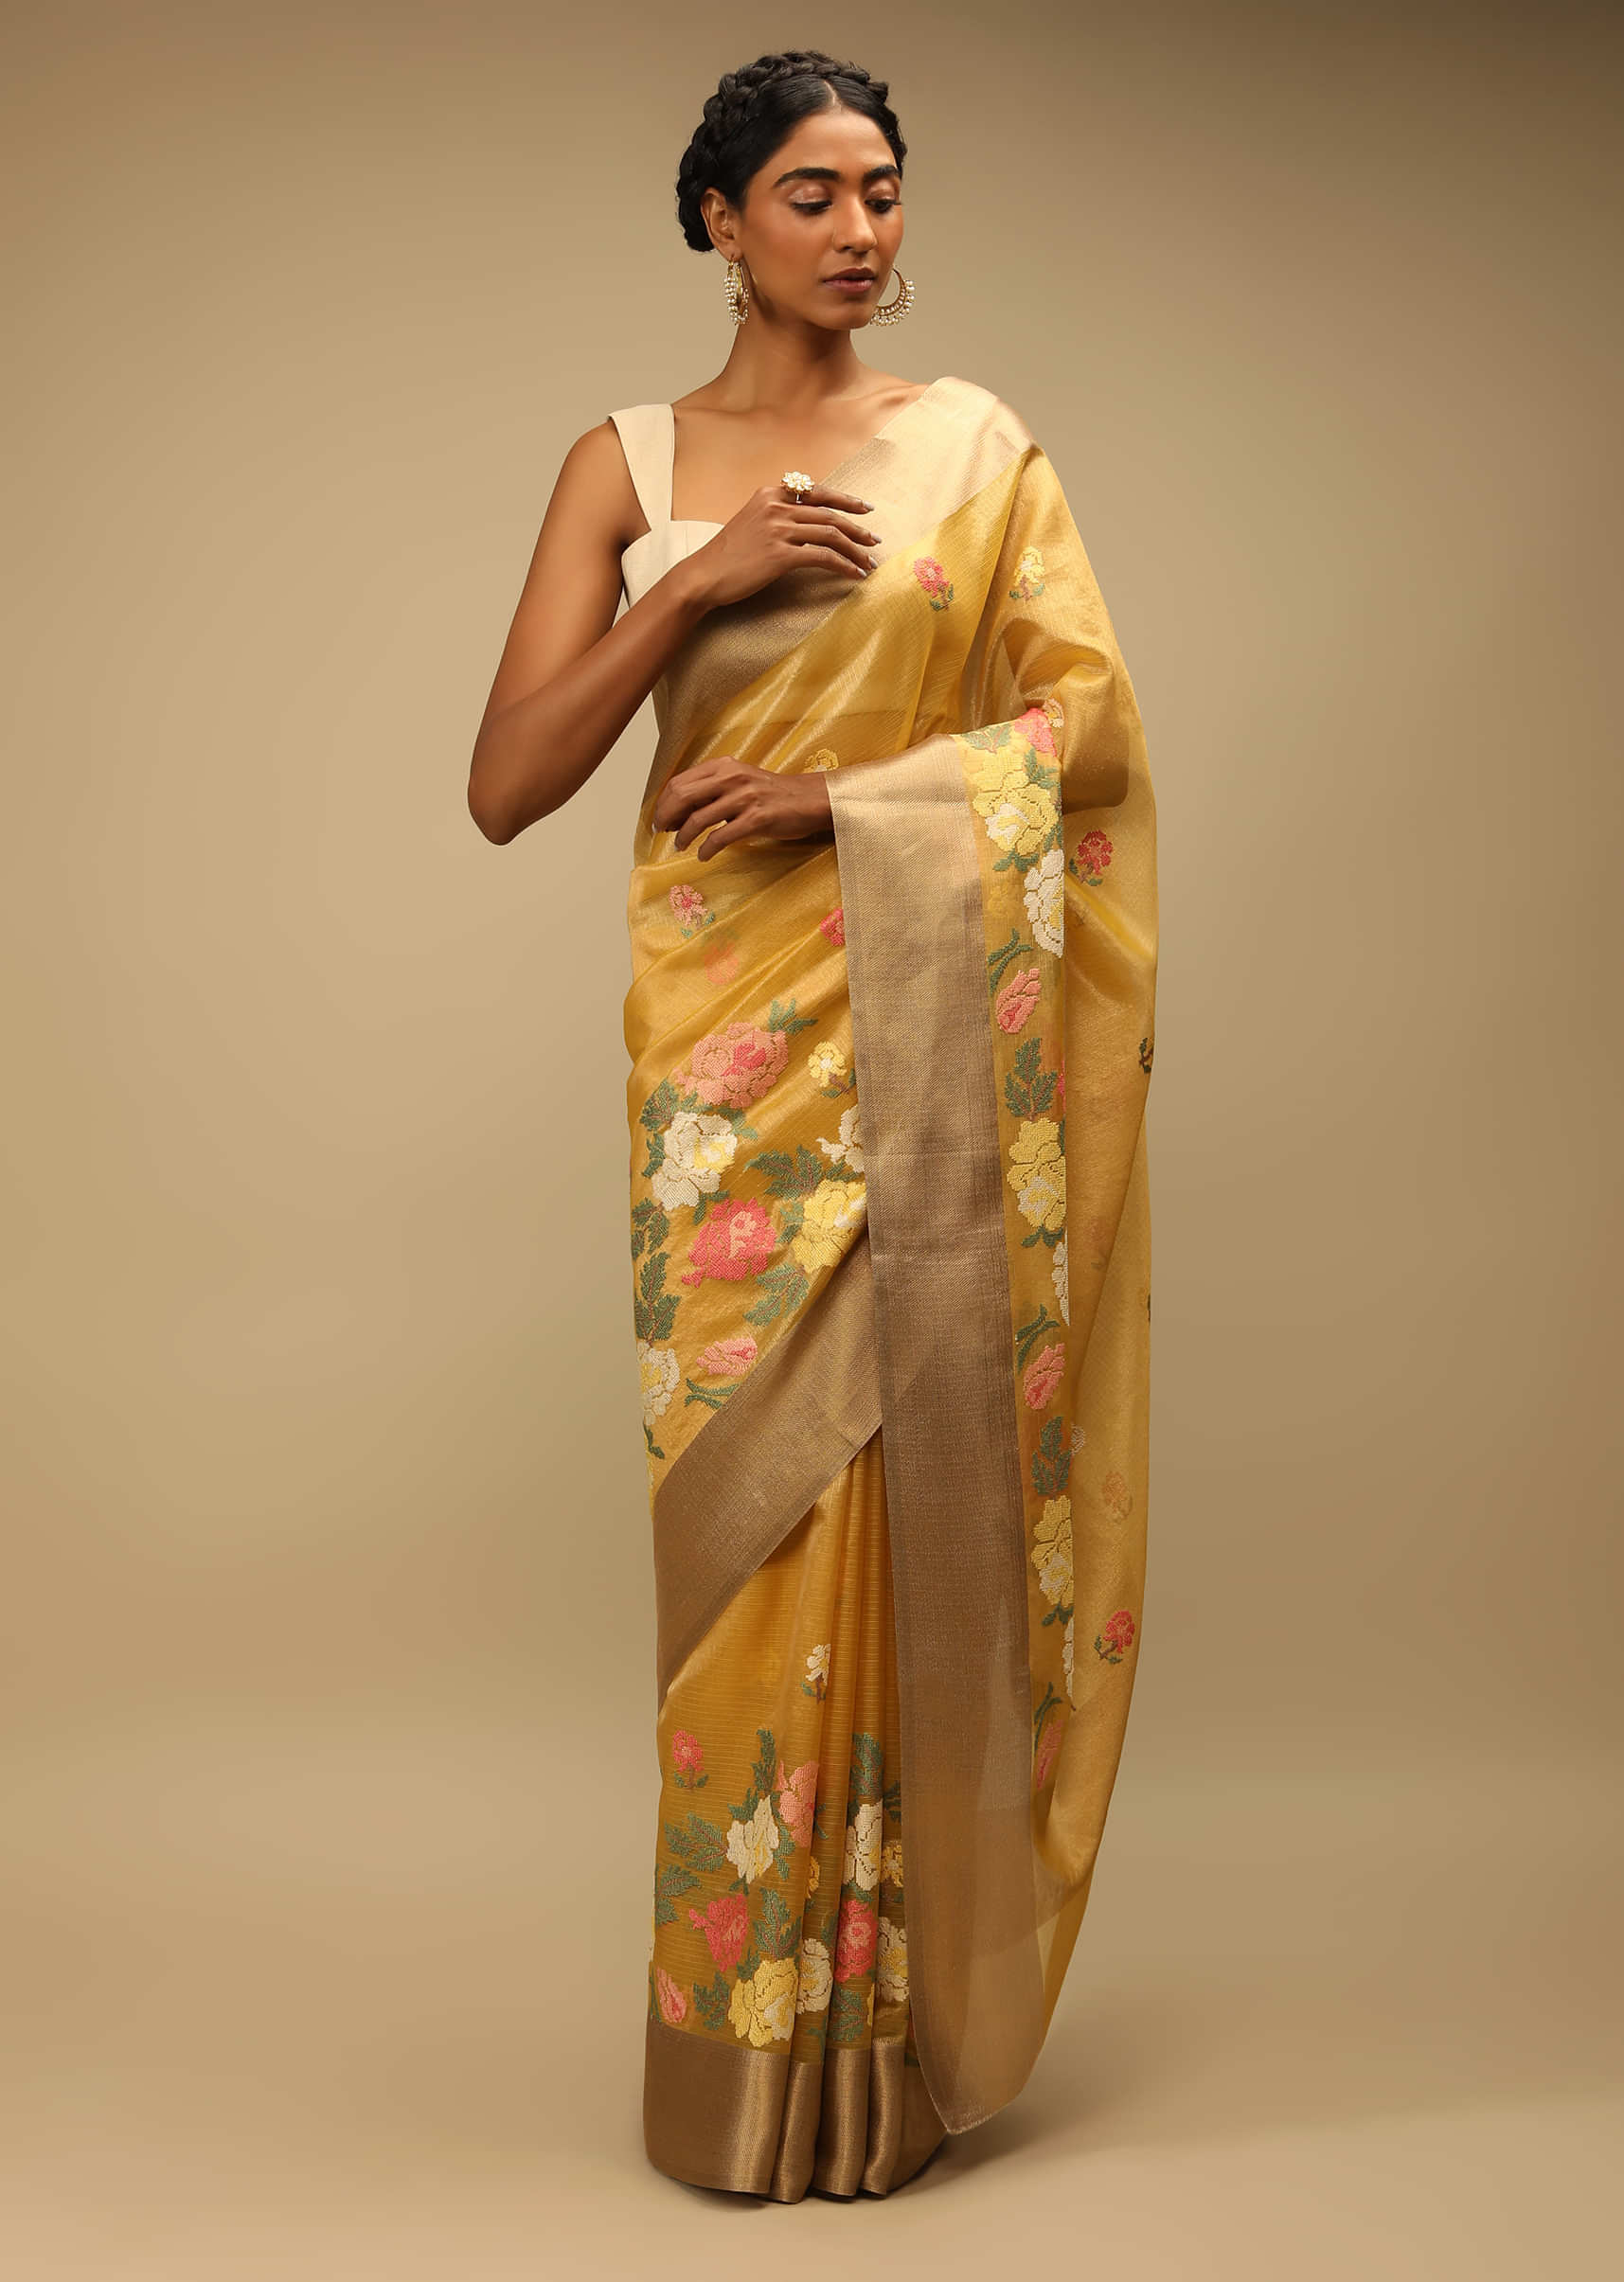 Mustard Saree In Zari Kota Silk With Multi Colored Resham Embroidered Flowers On The Border  